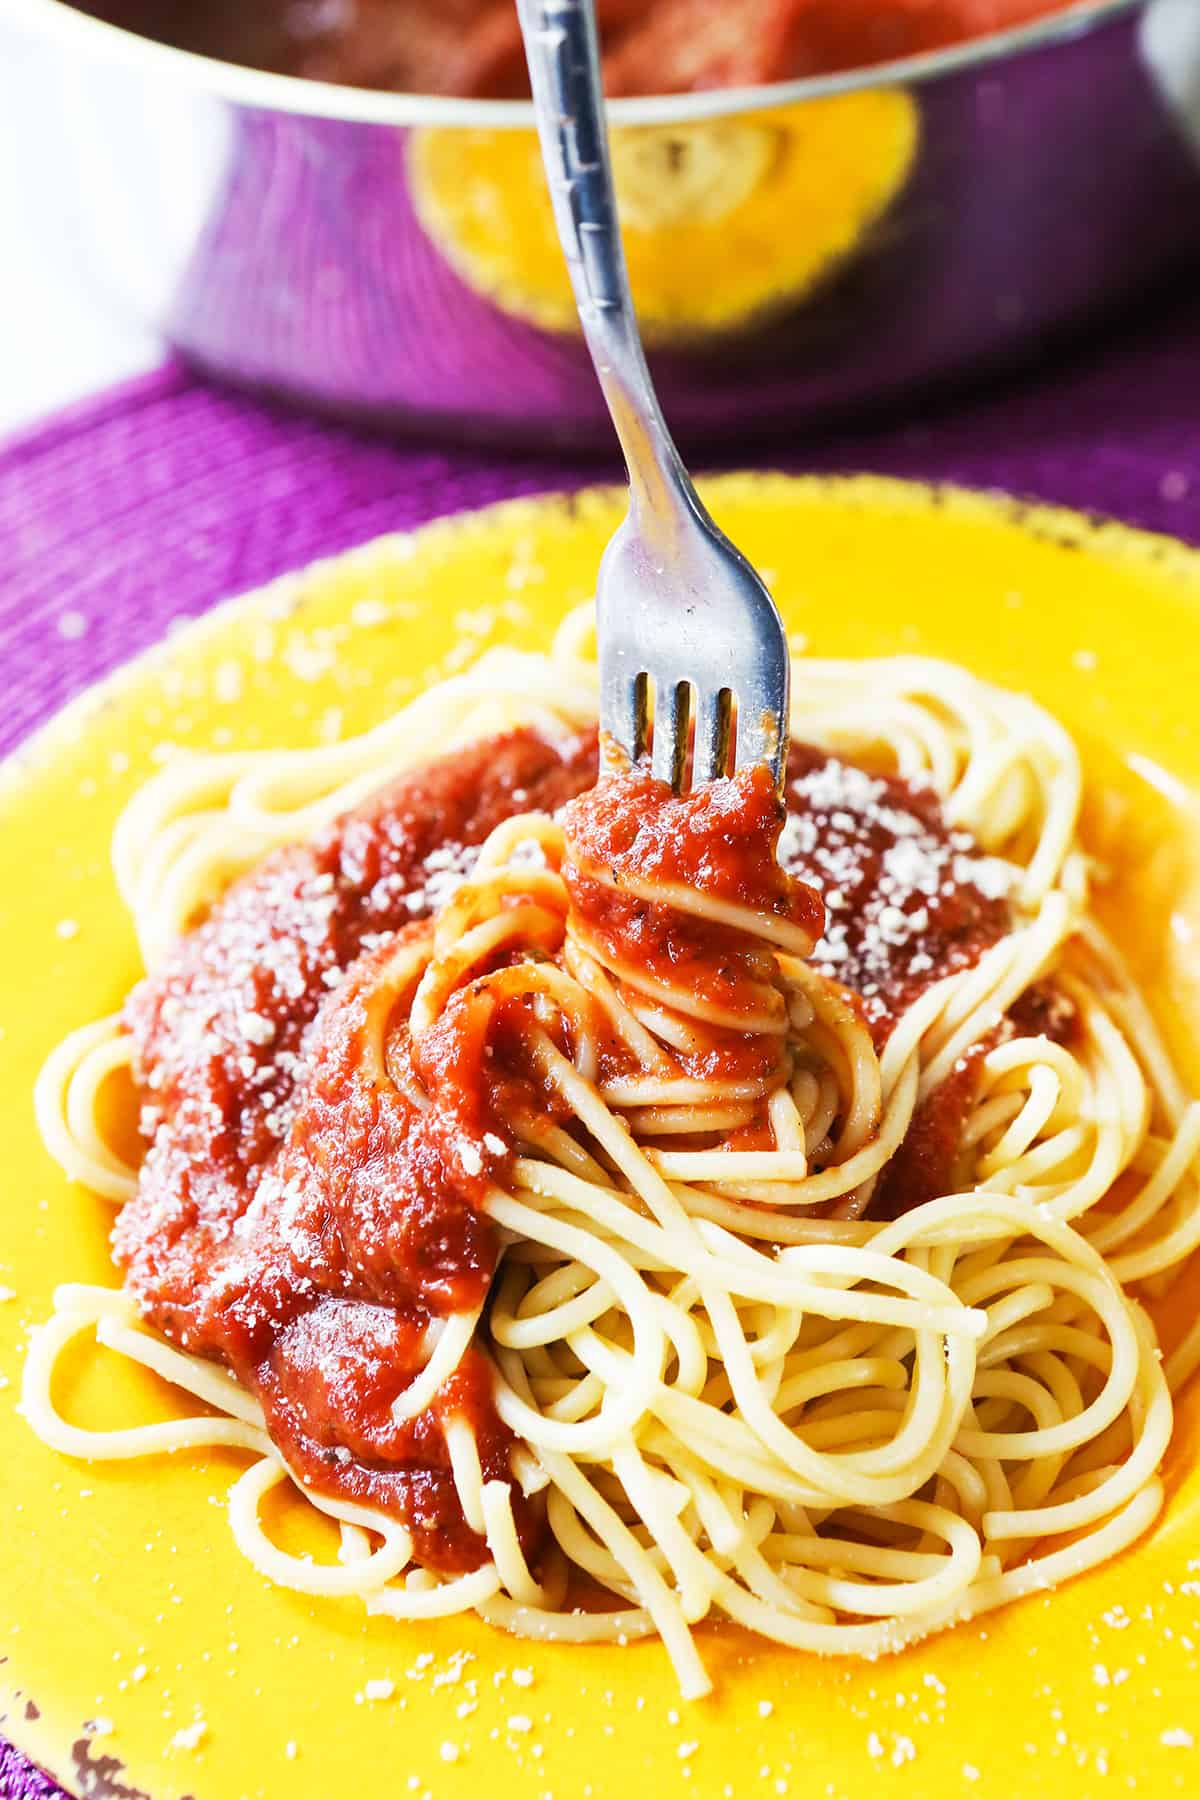 Fork inserted into the center of a heaping pile of spaghetti with sauce.